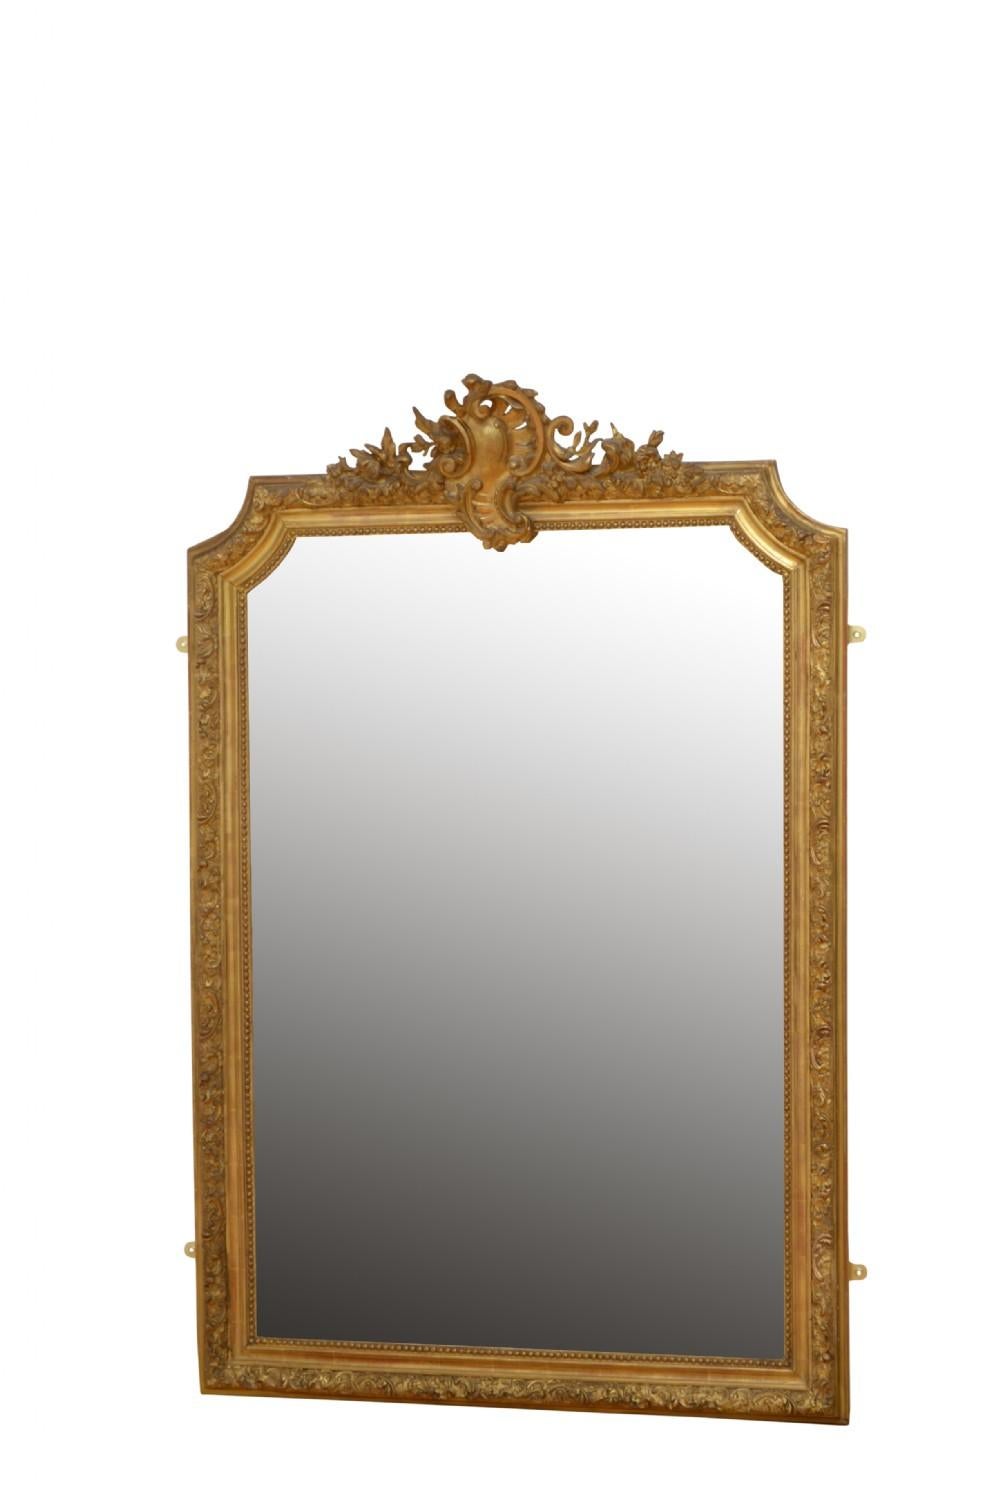 K0161 very attractive gilded mirror, having original bevelled edge glass with some foxing in beautifully carved frame with beaded edge and leafy scrolls throughout finished with a shell and floral crest to the top. This antique mirror retains its